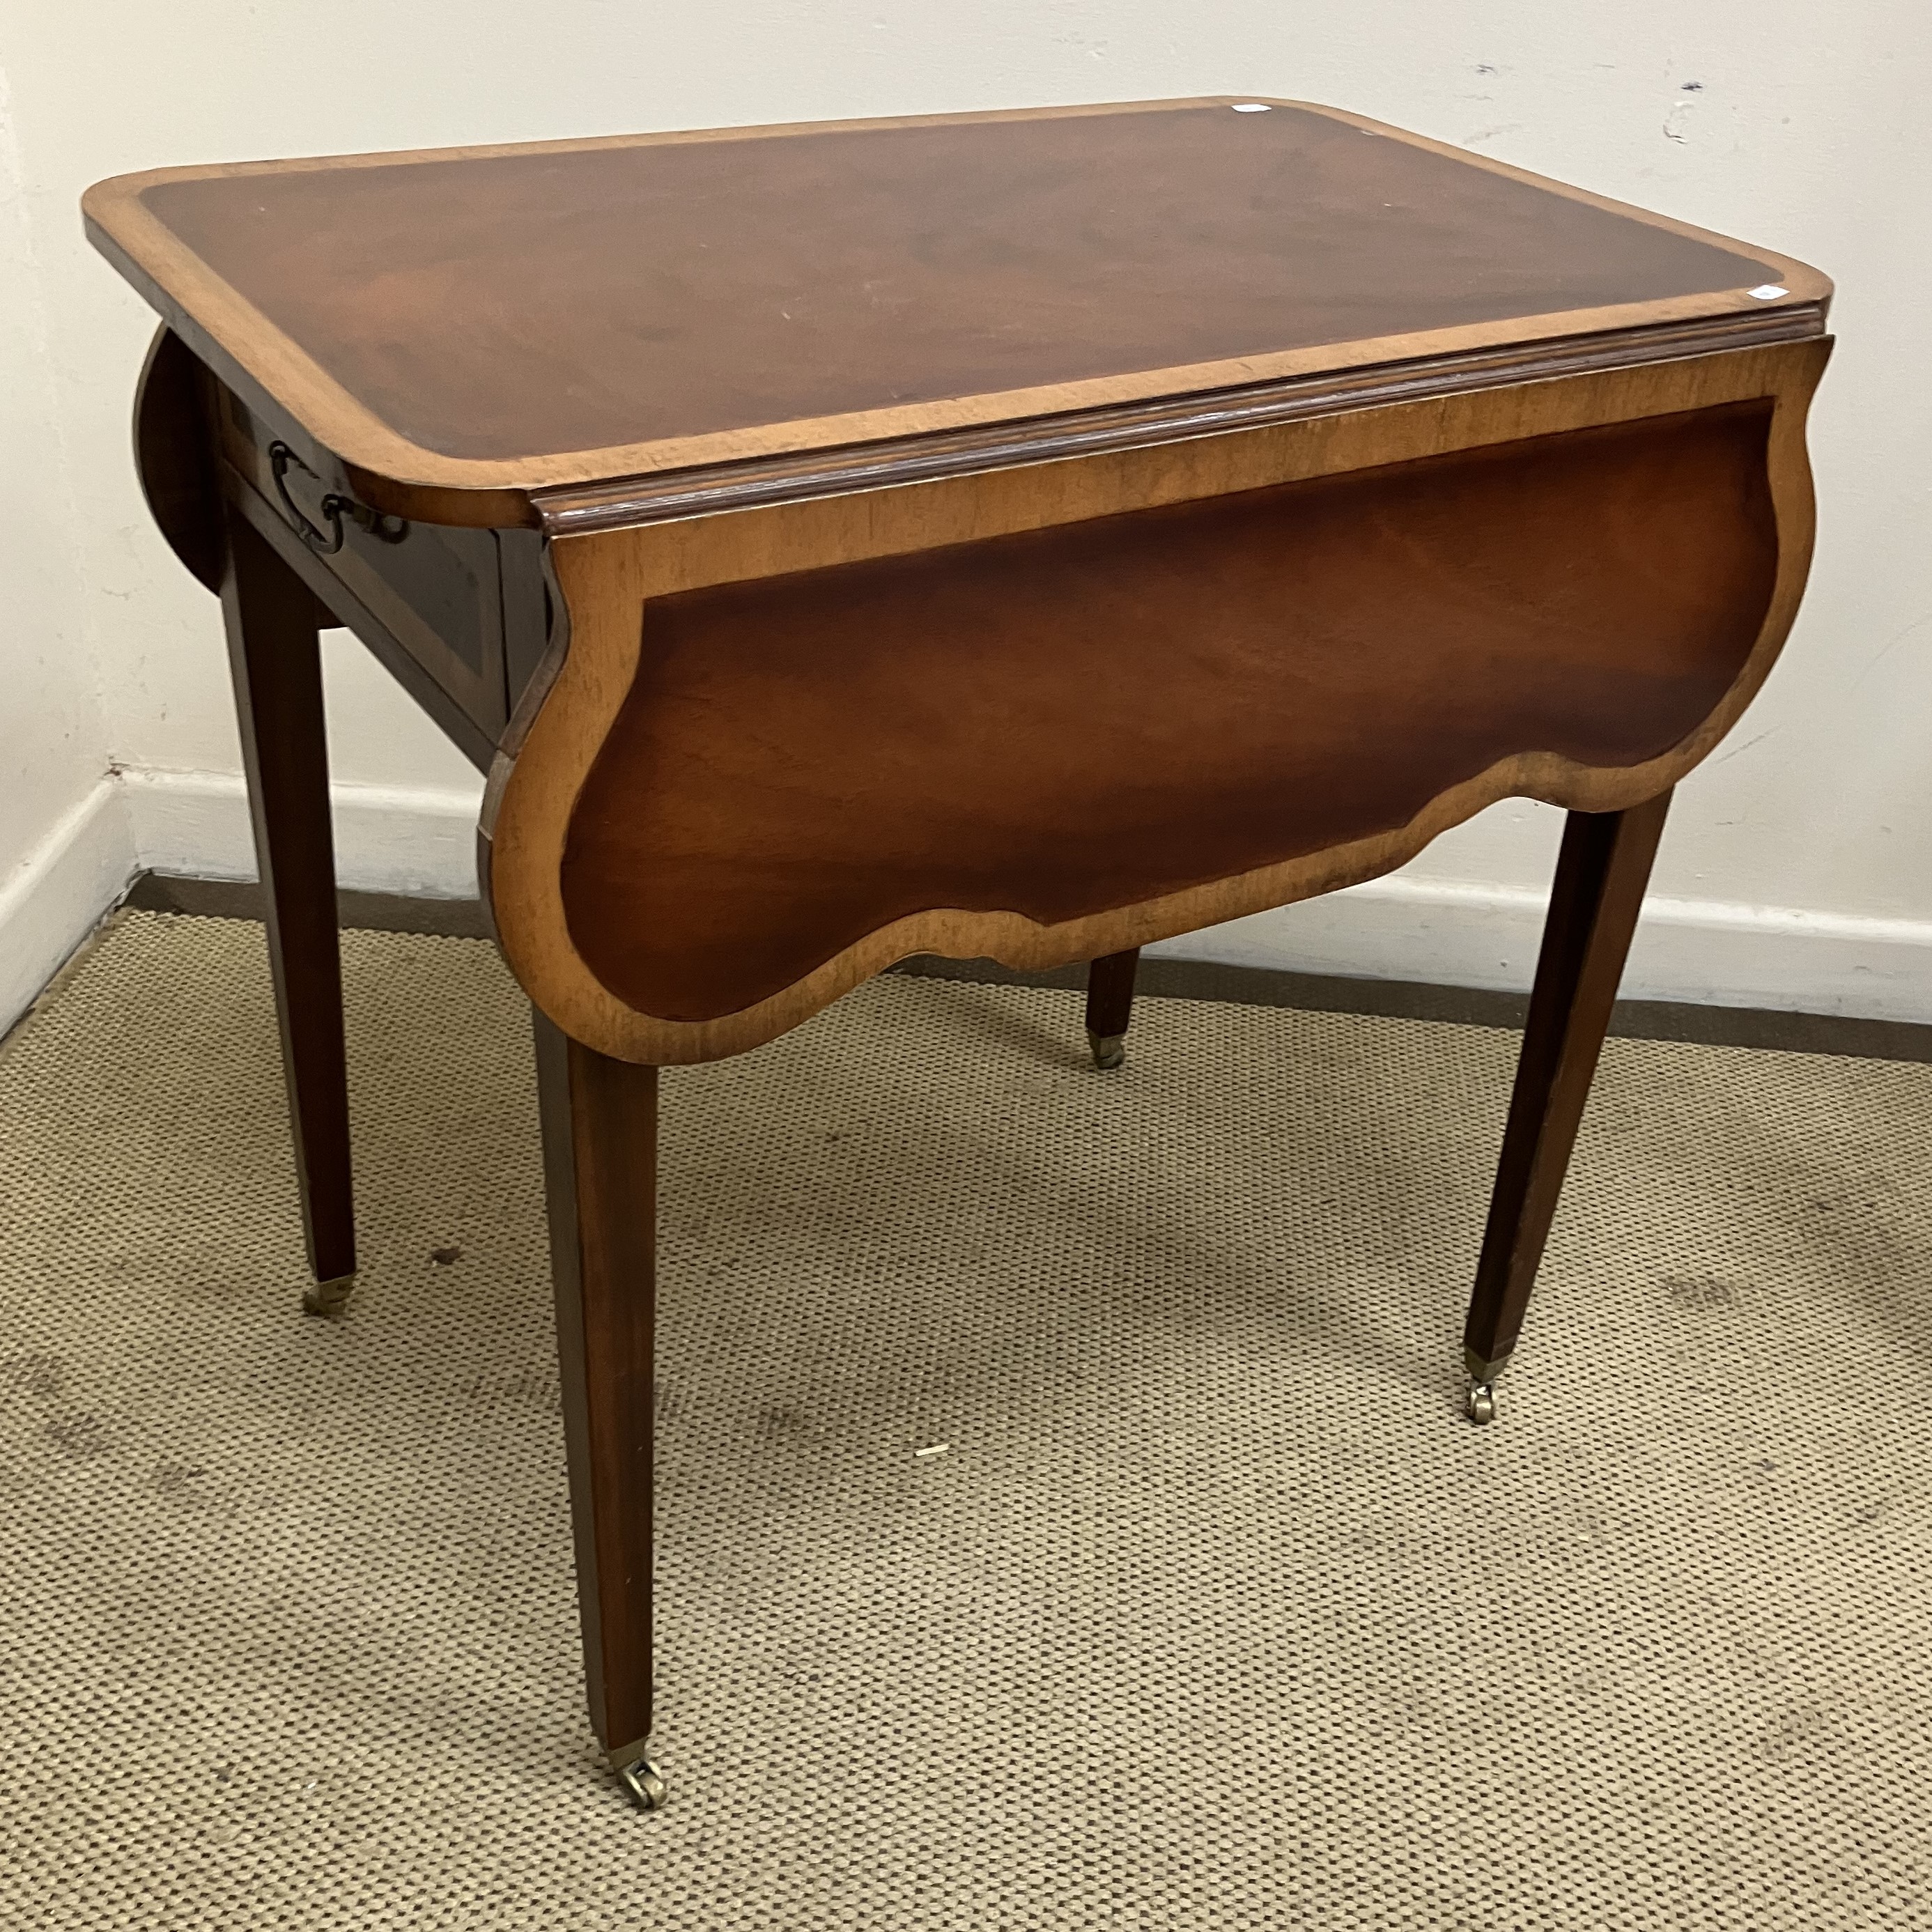 A modern mahogany and cross-banded butterfly wing drop-leaf Pembroke table in the Georgian style - Image 2 of 3